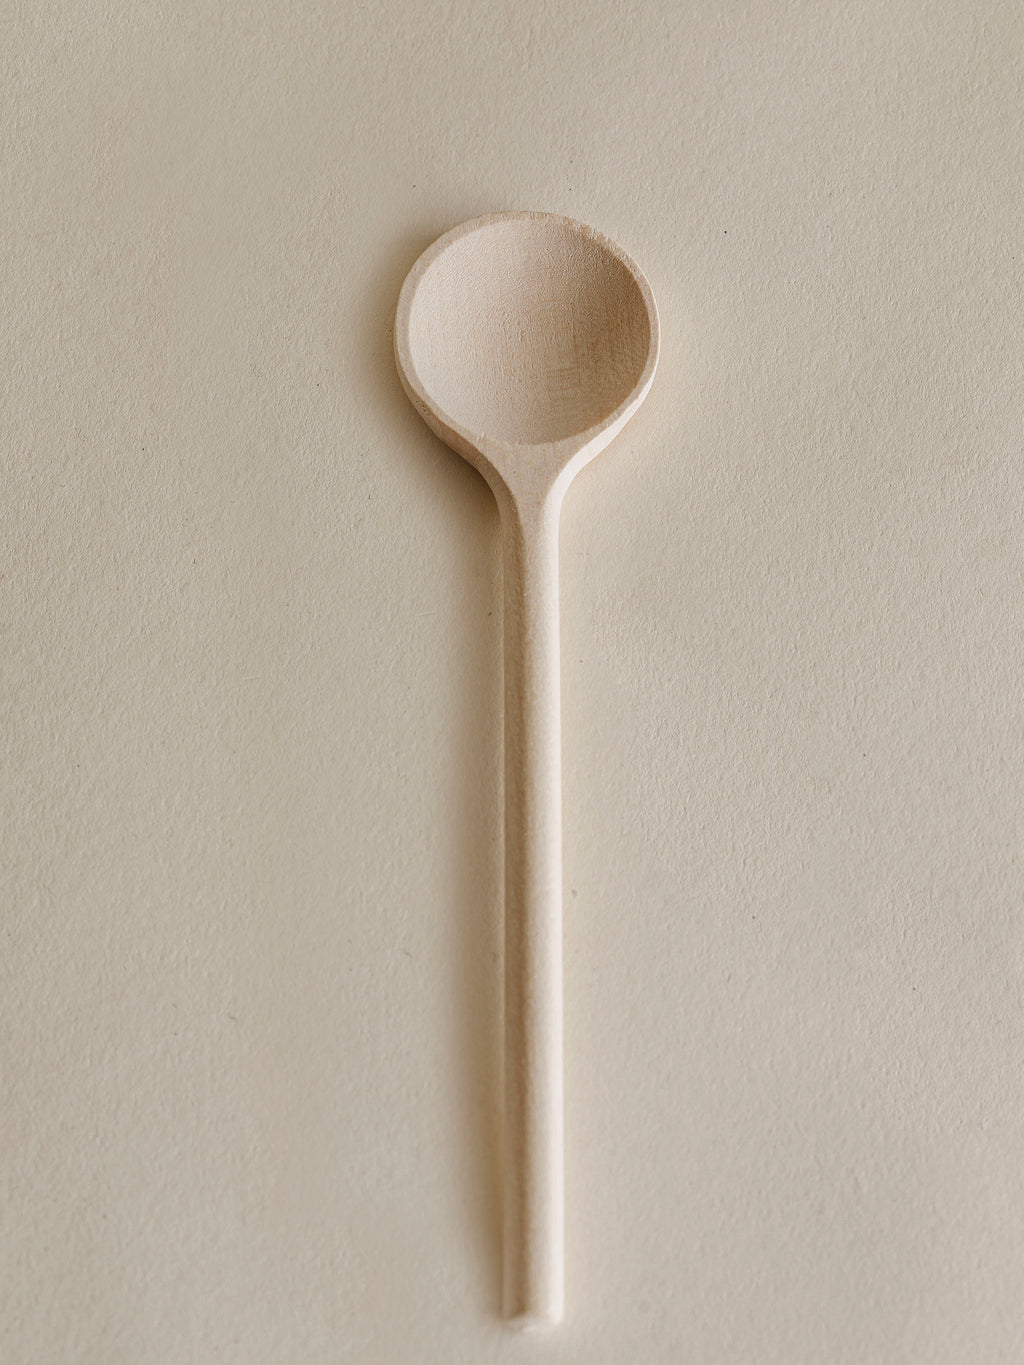 Honeybloom Farmhouse Speckled Stoneware Spoon Me Spoon Rest, Neutral Sold by at Home